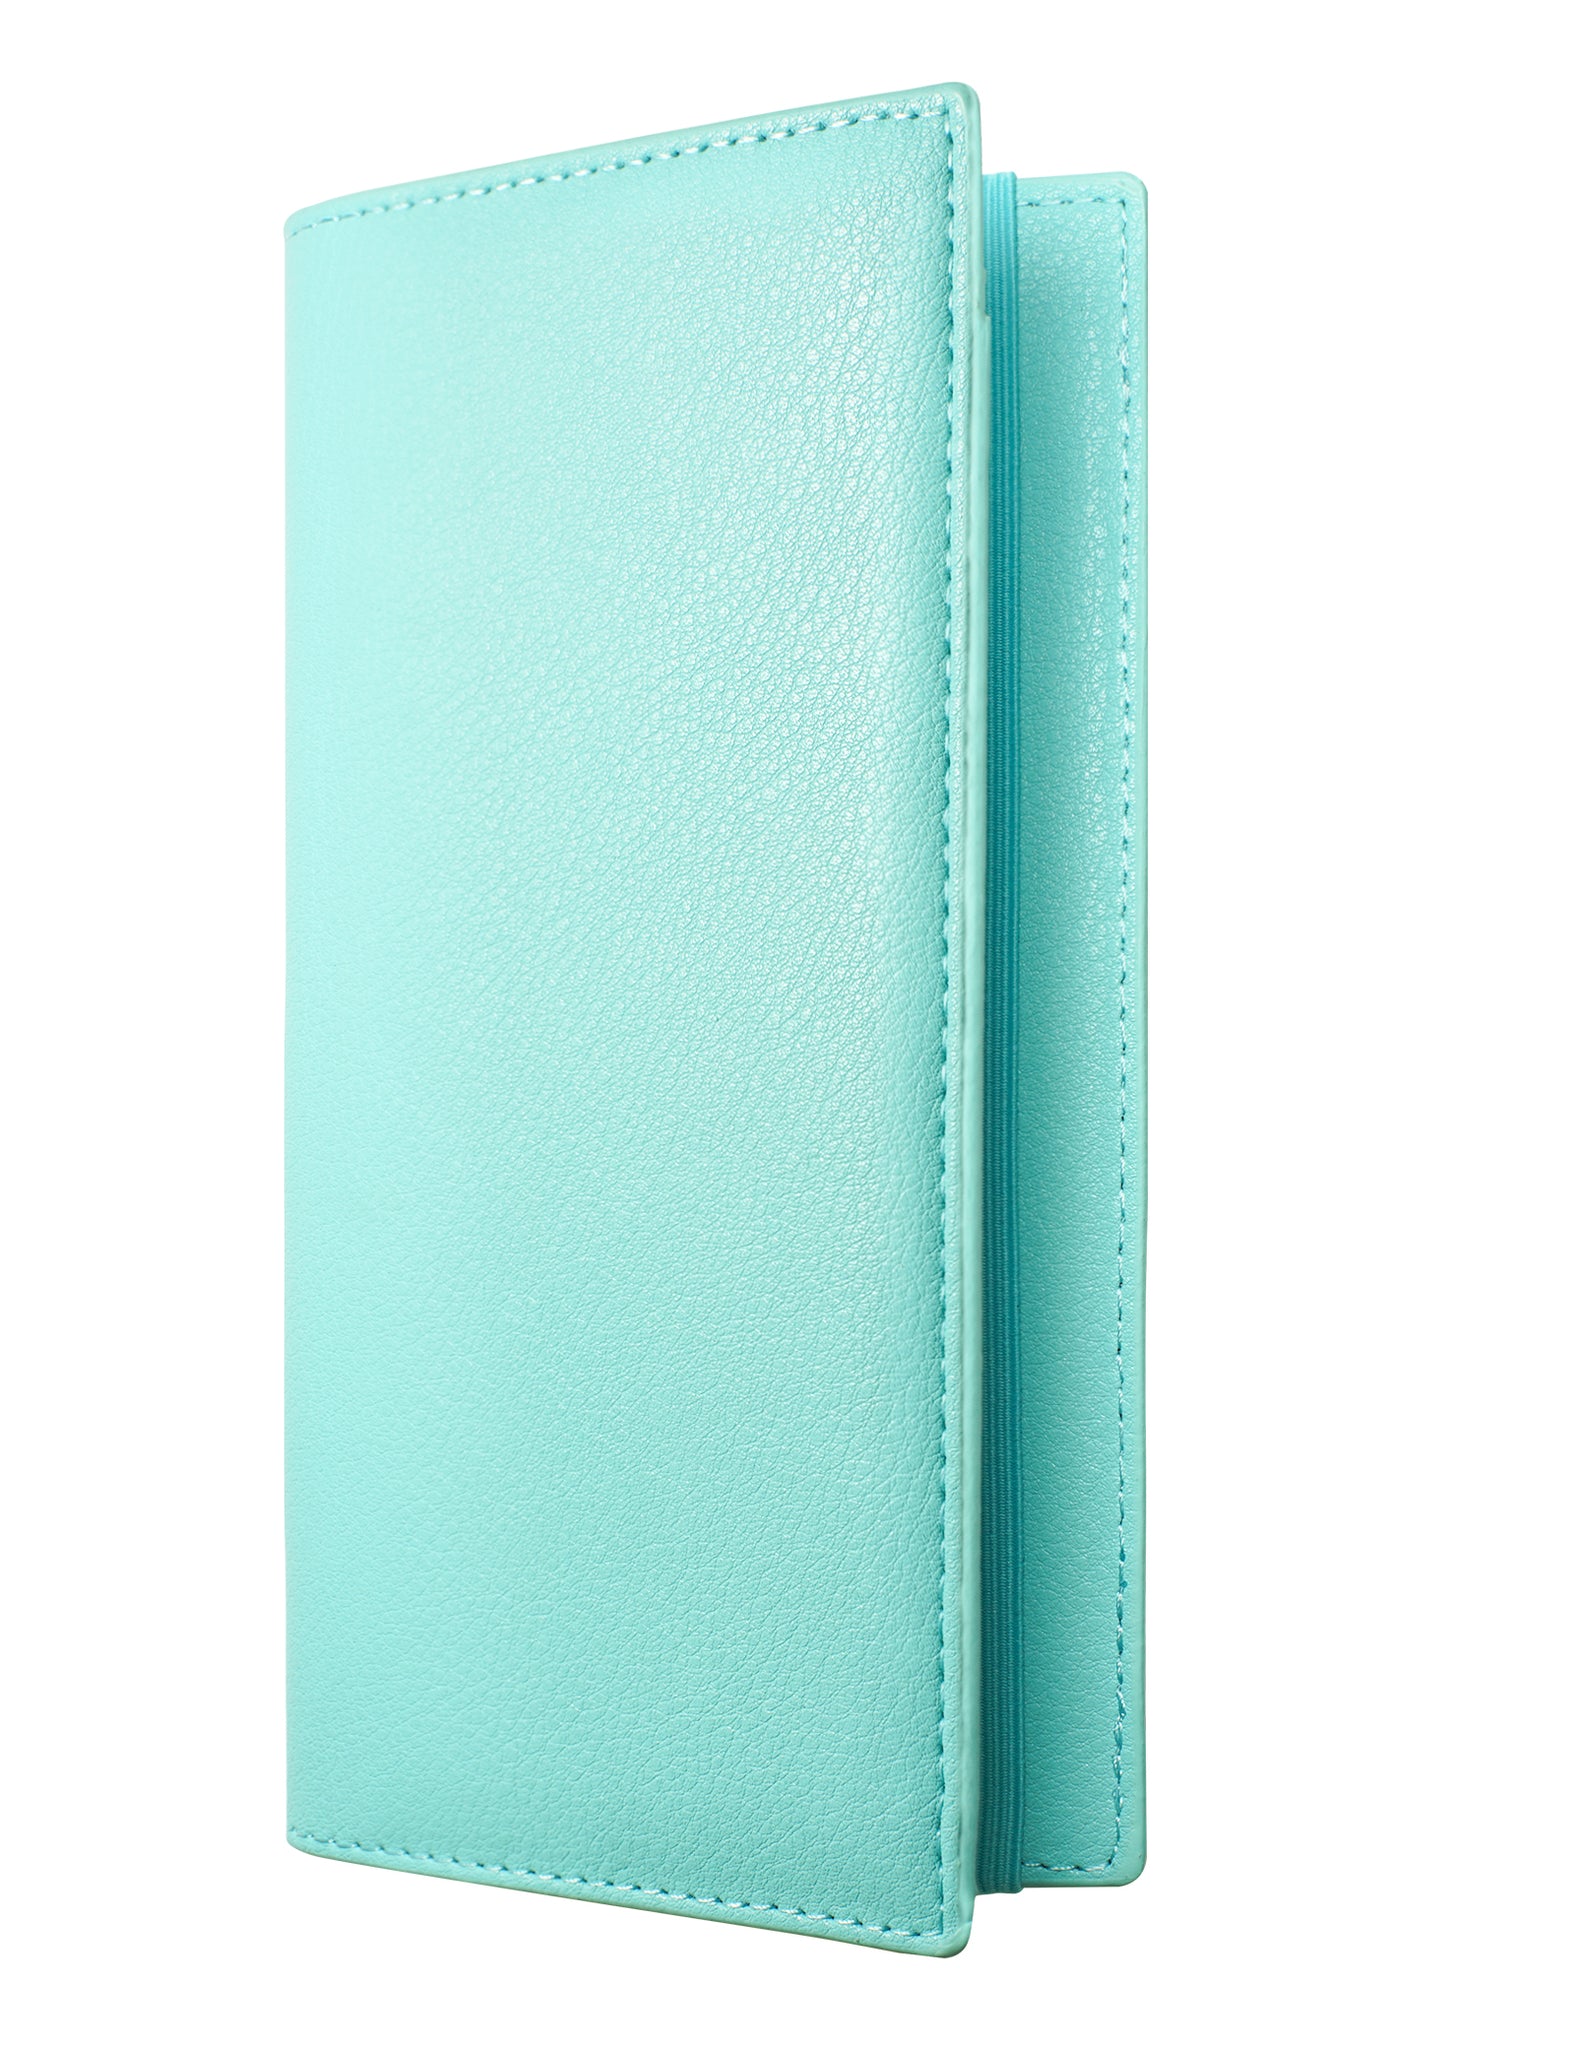 7"x3.5" Pale Turquoise Vegan Leather Checkbook Cover